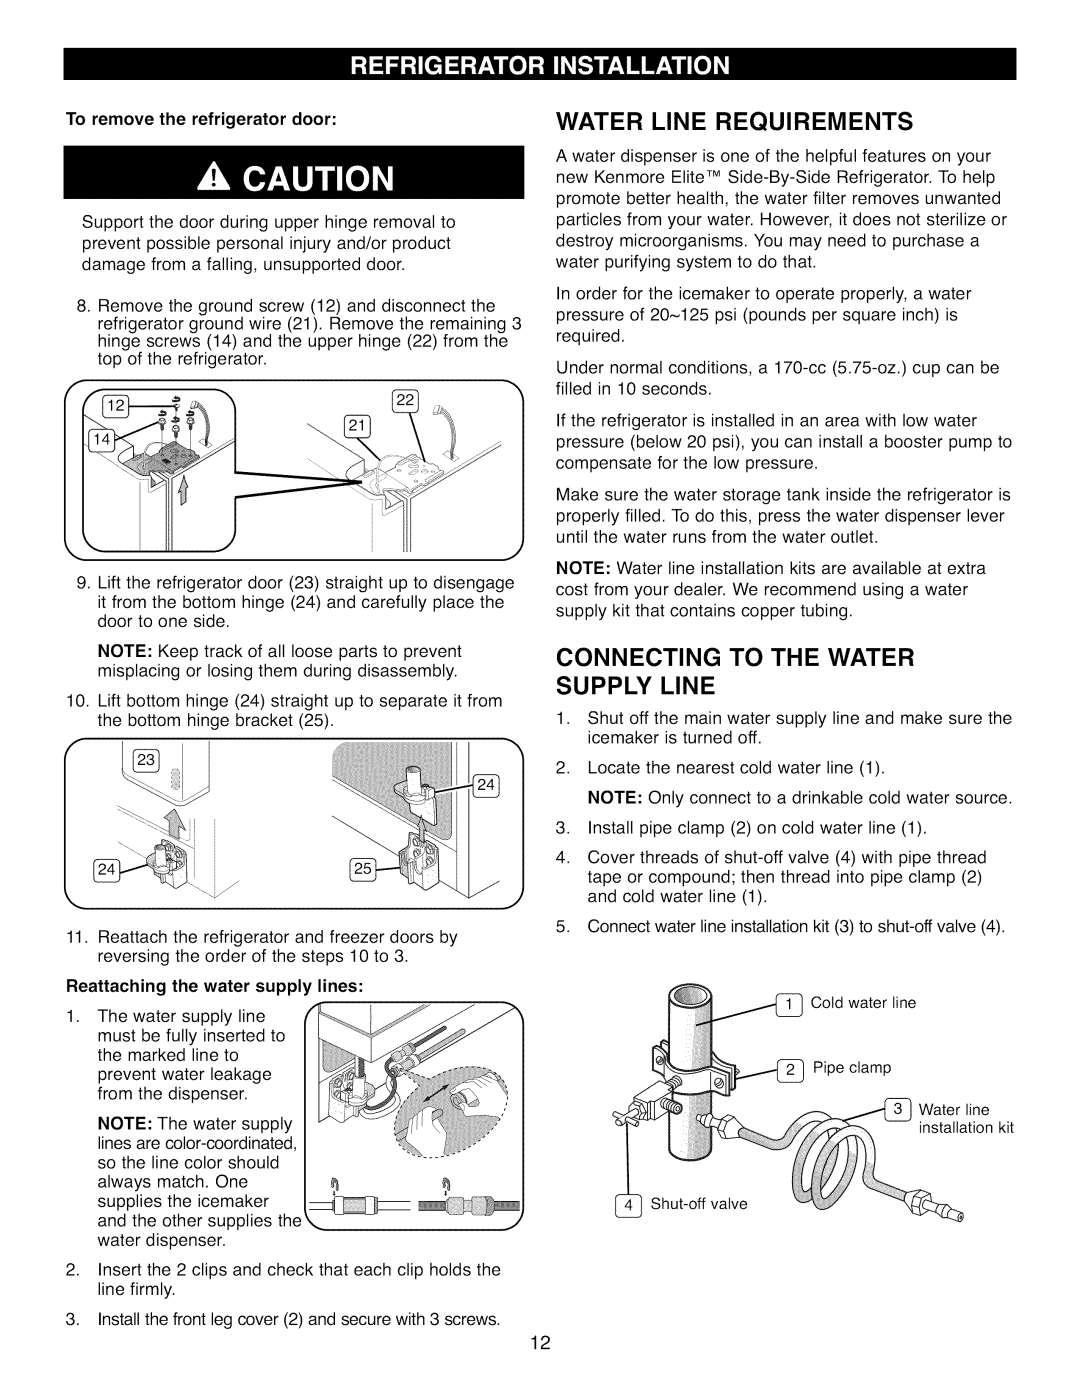 Kenmore 41003, 41002, 41009 manual Water Line Requirements, Connecting To The Water Supply Line 